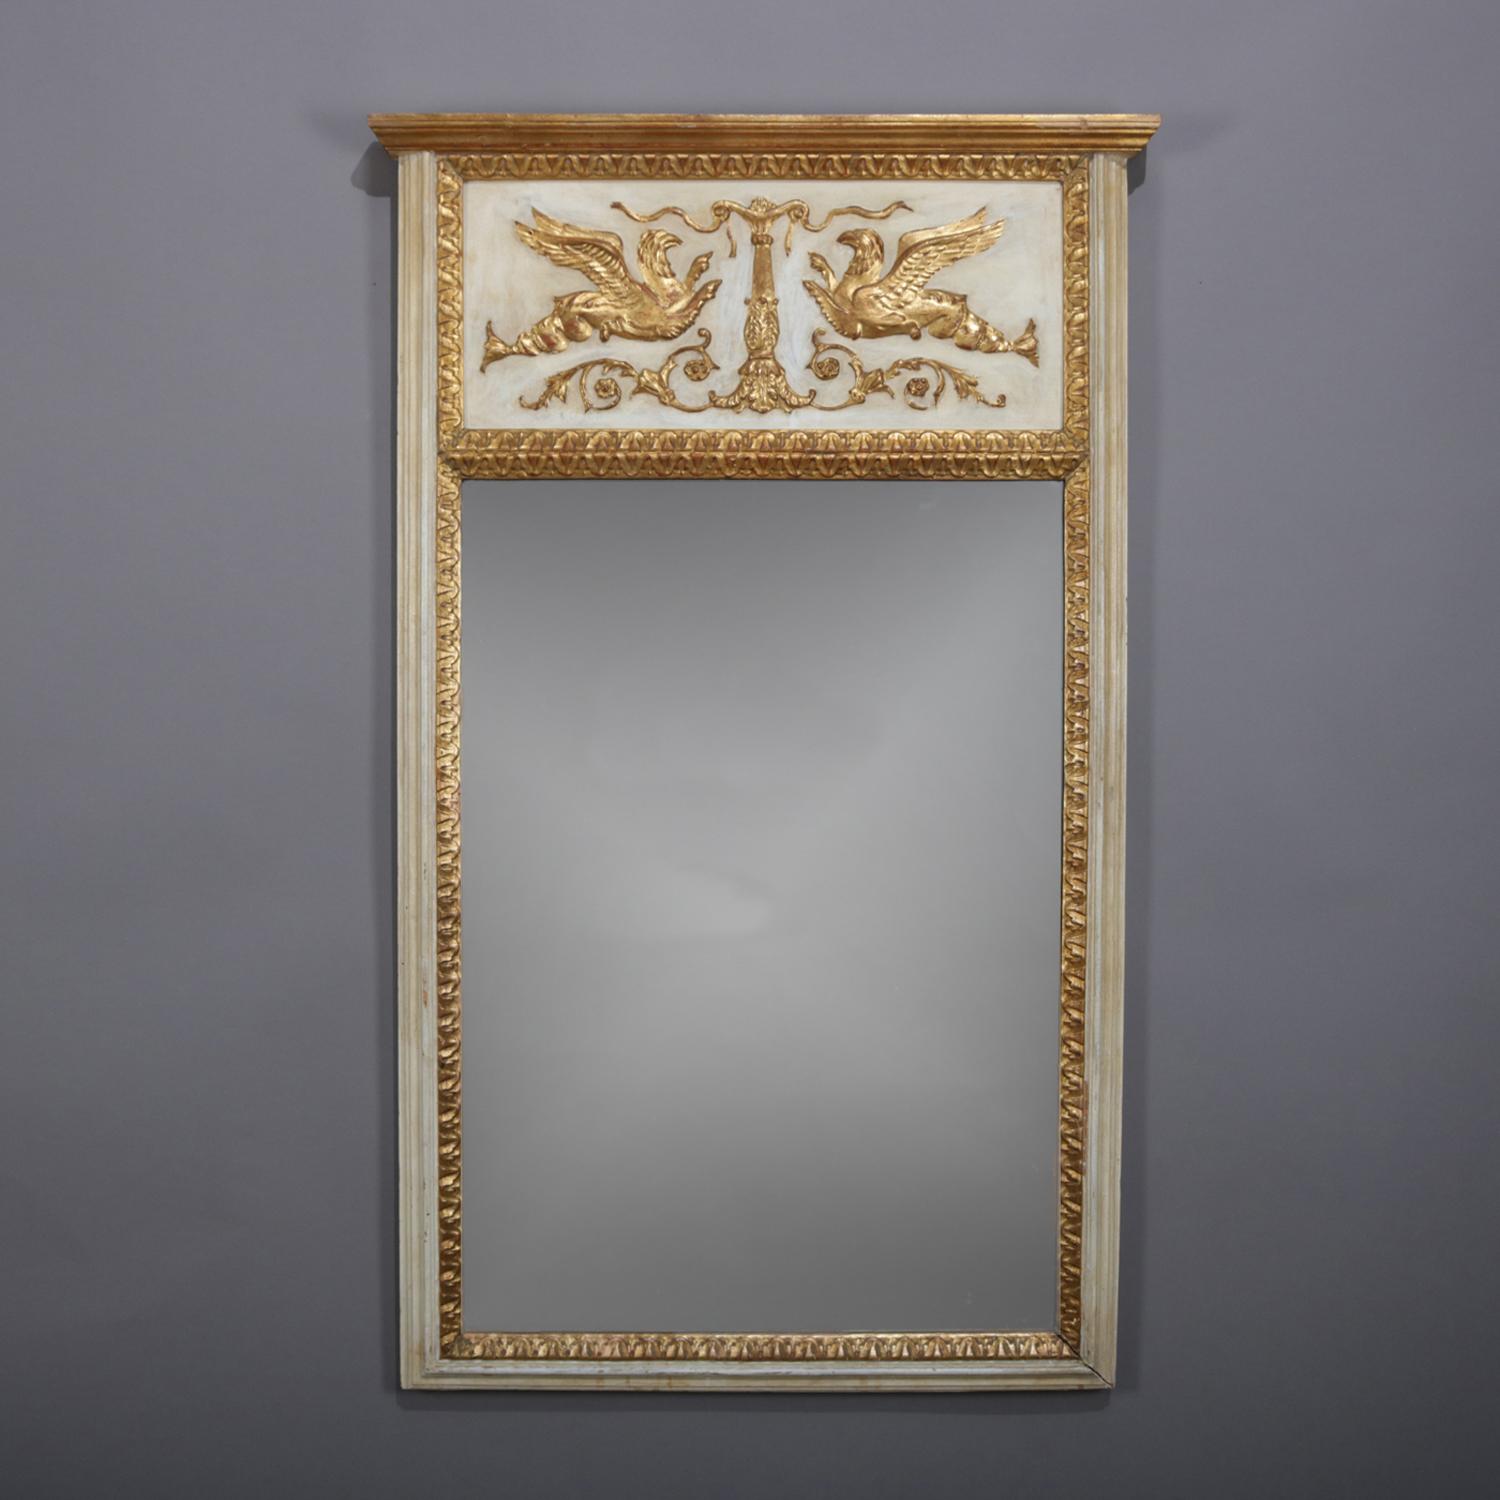 French Empire neoclassical trumeau wall mirror features gilt and whitewash painted frame with upper reserve having central gilt column with flanking phoenix, 20th century.

Measures - 49